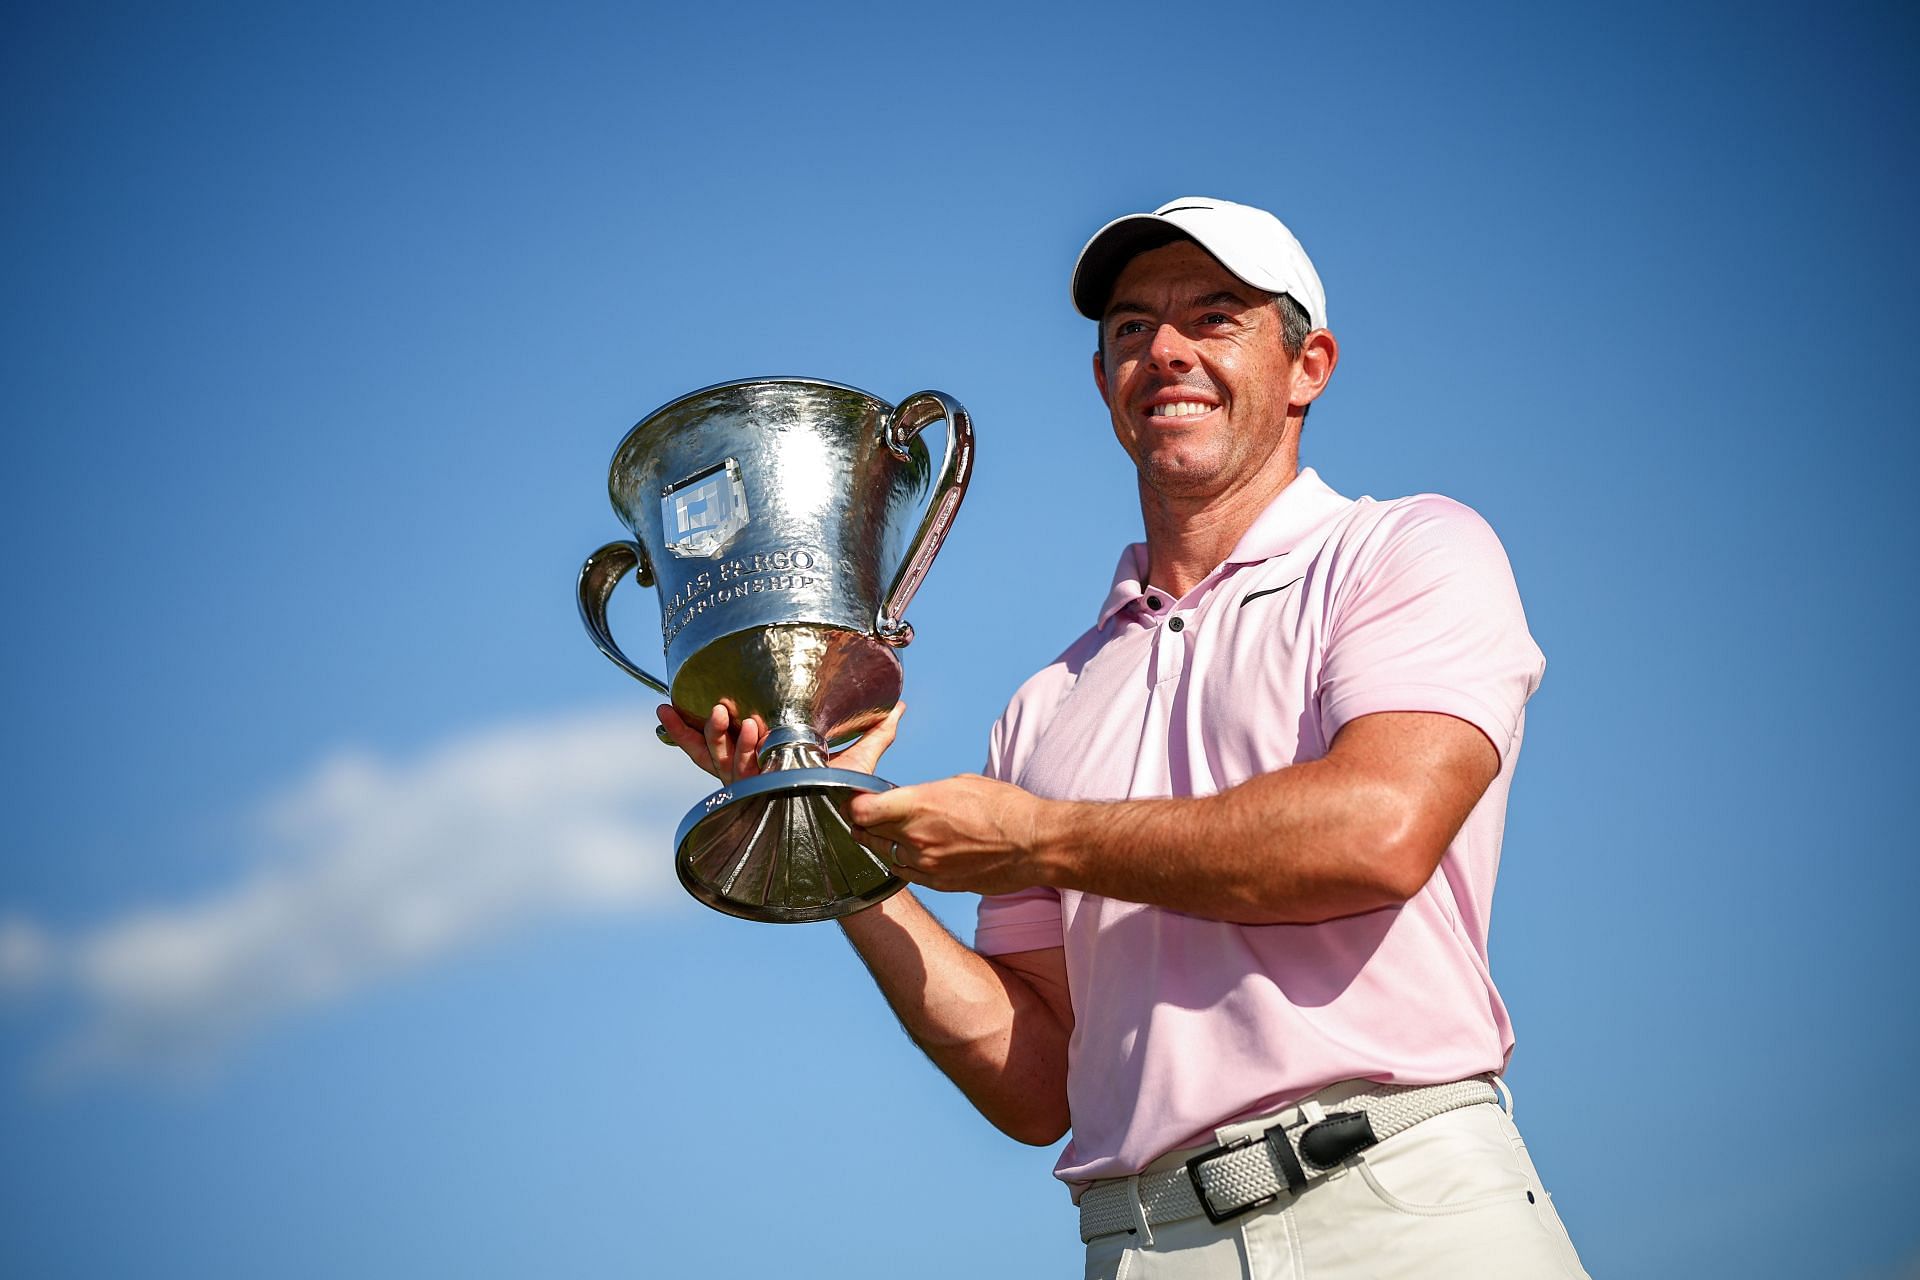 Rory McIlroy is playing the PGA Championship this weekend